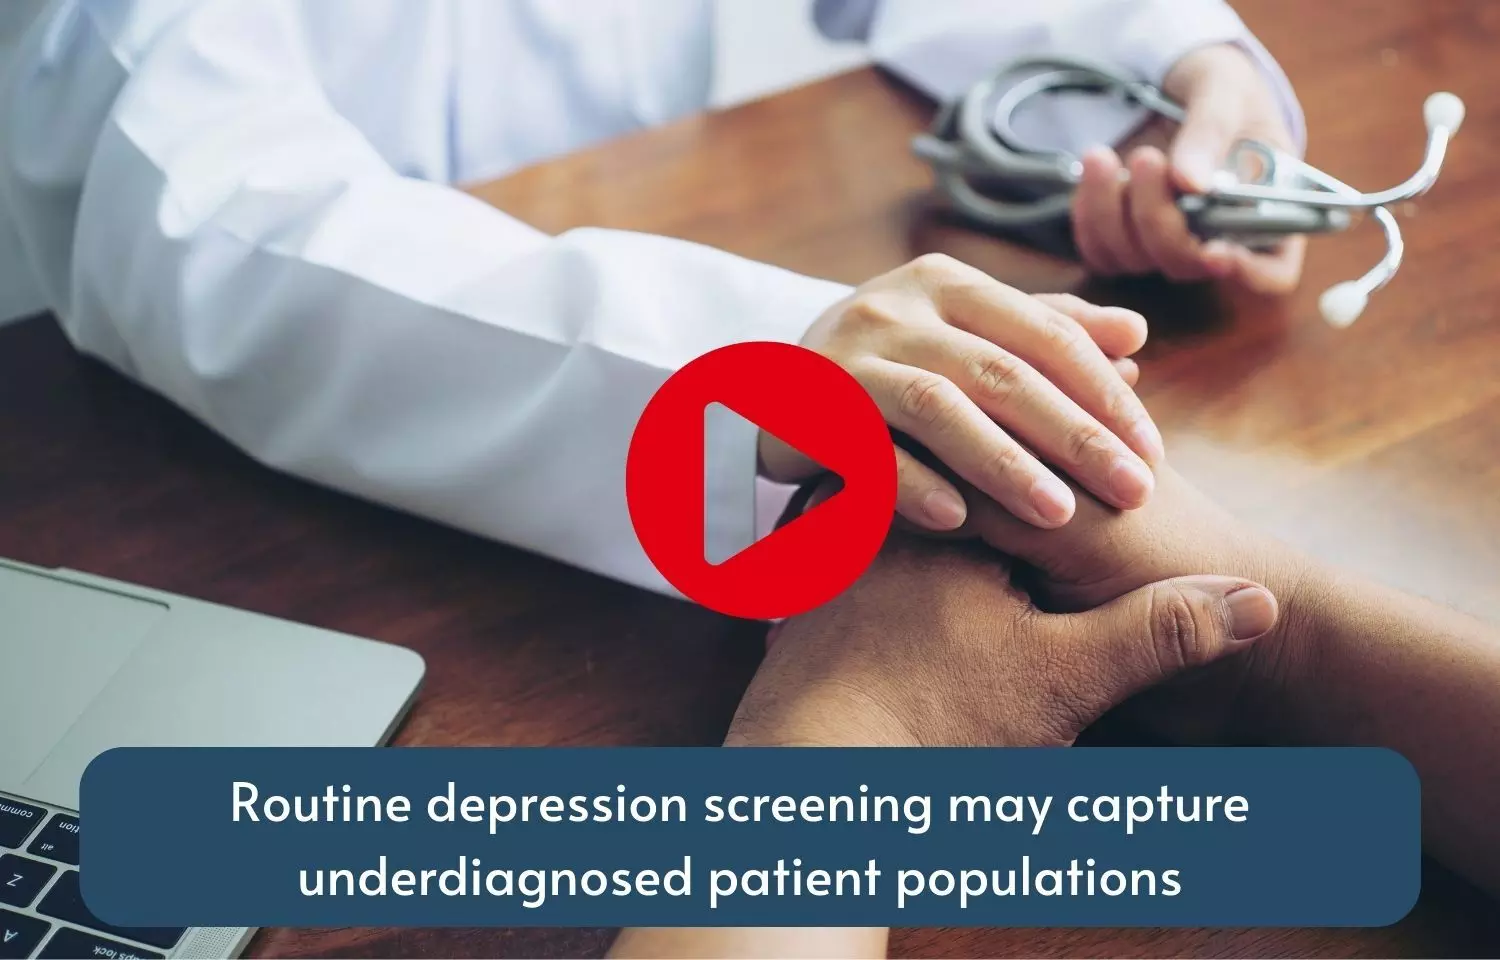 Routine depression screening which may capture underdiagnosed patient populations